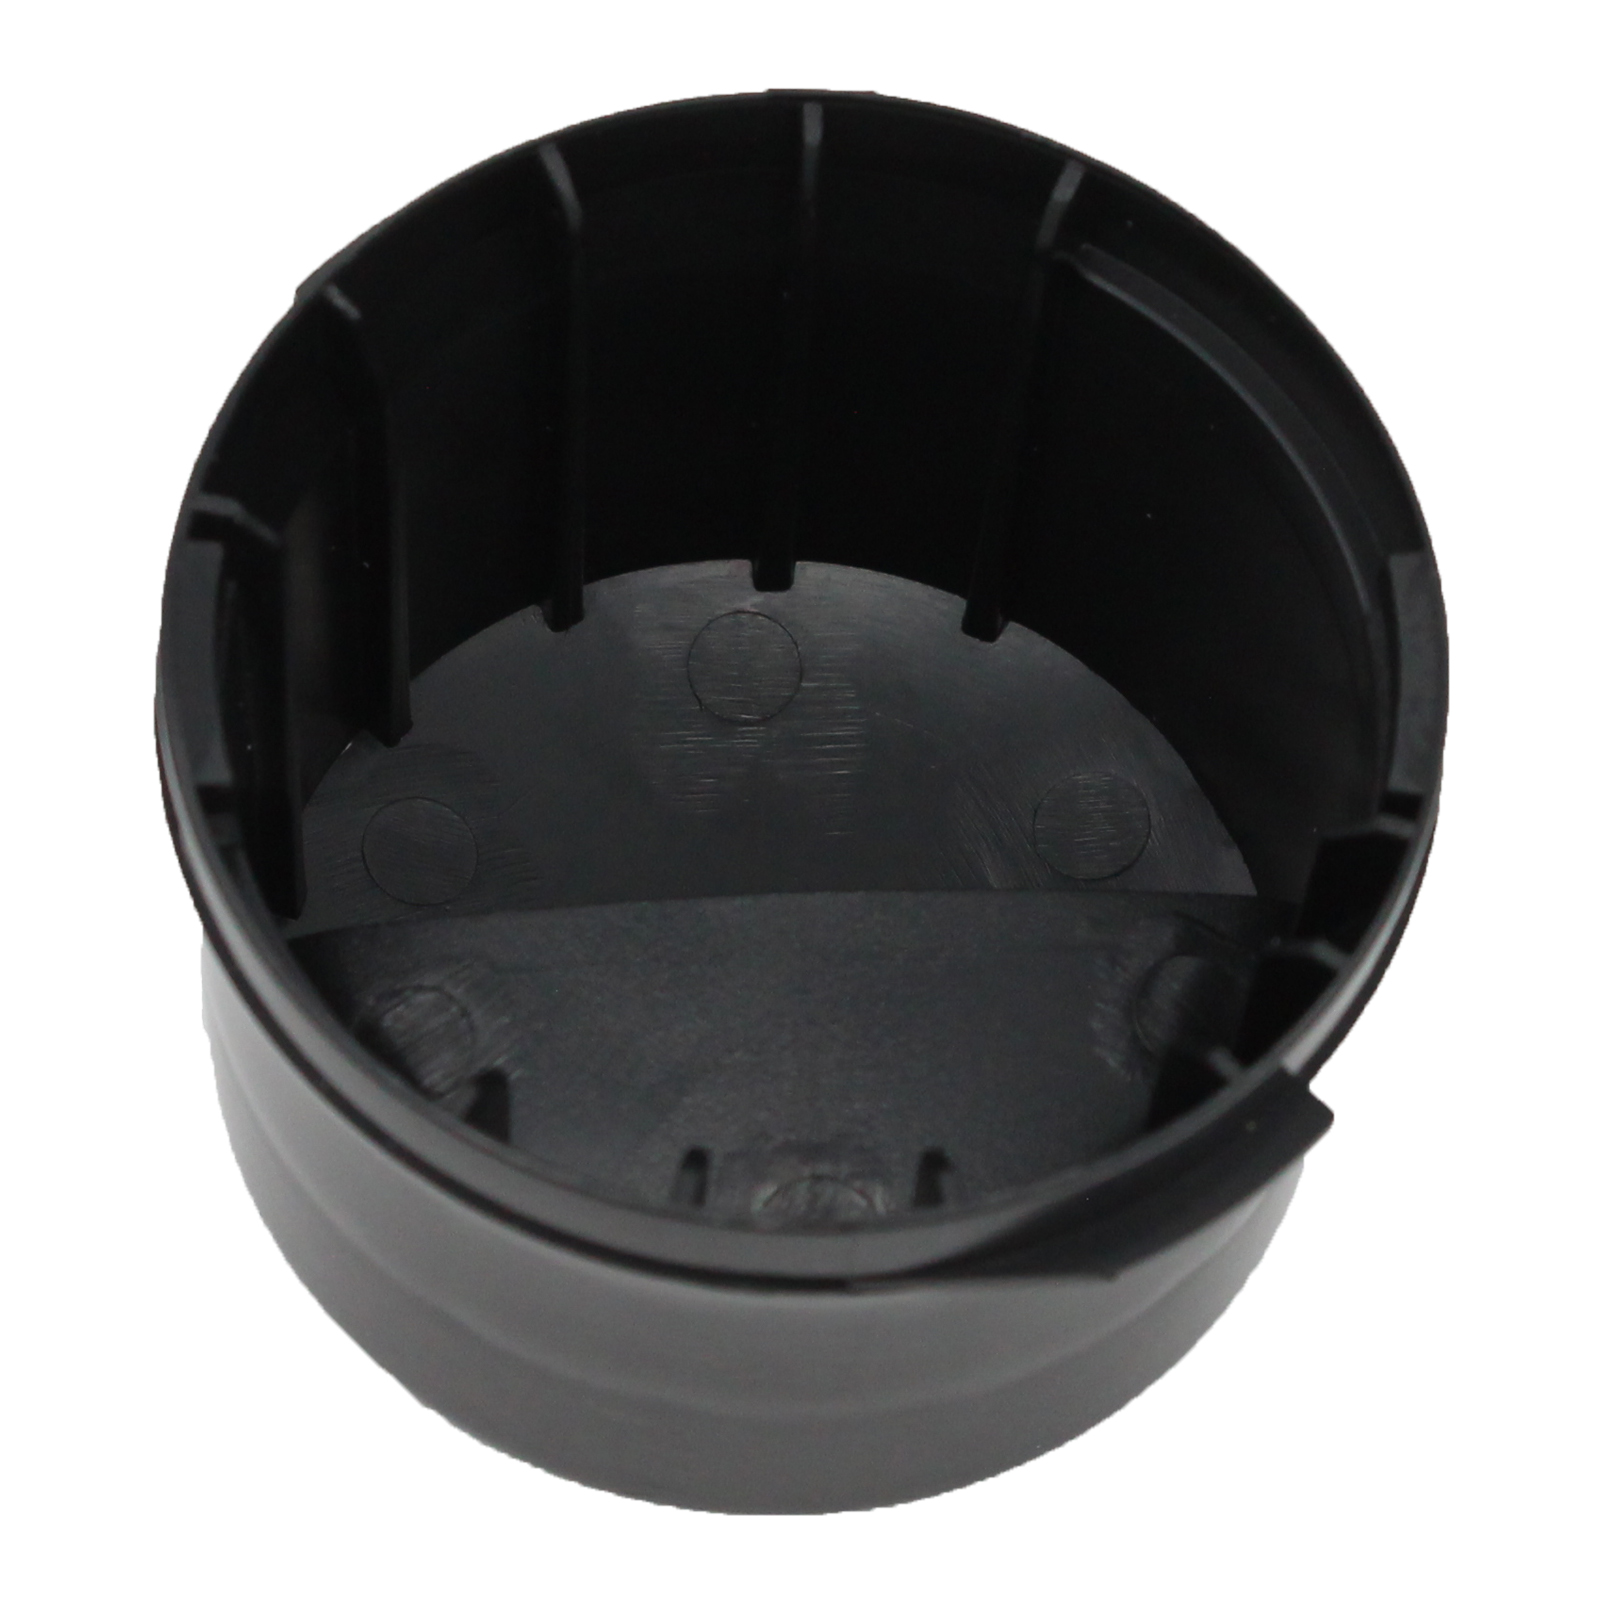 2260502B Refrigerator Water Filter Cap Replacement for Kenmore / Sears 10656246400 Refrigerator - Compatible with WP2260518B Black Water Filter Cap - UpStart Components Brand - image 4 of 4